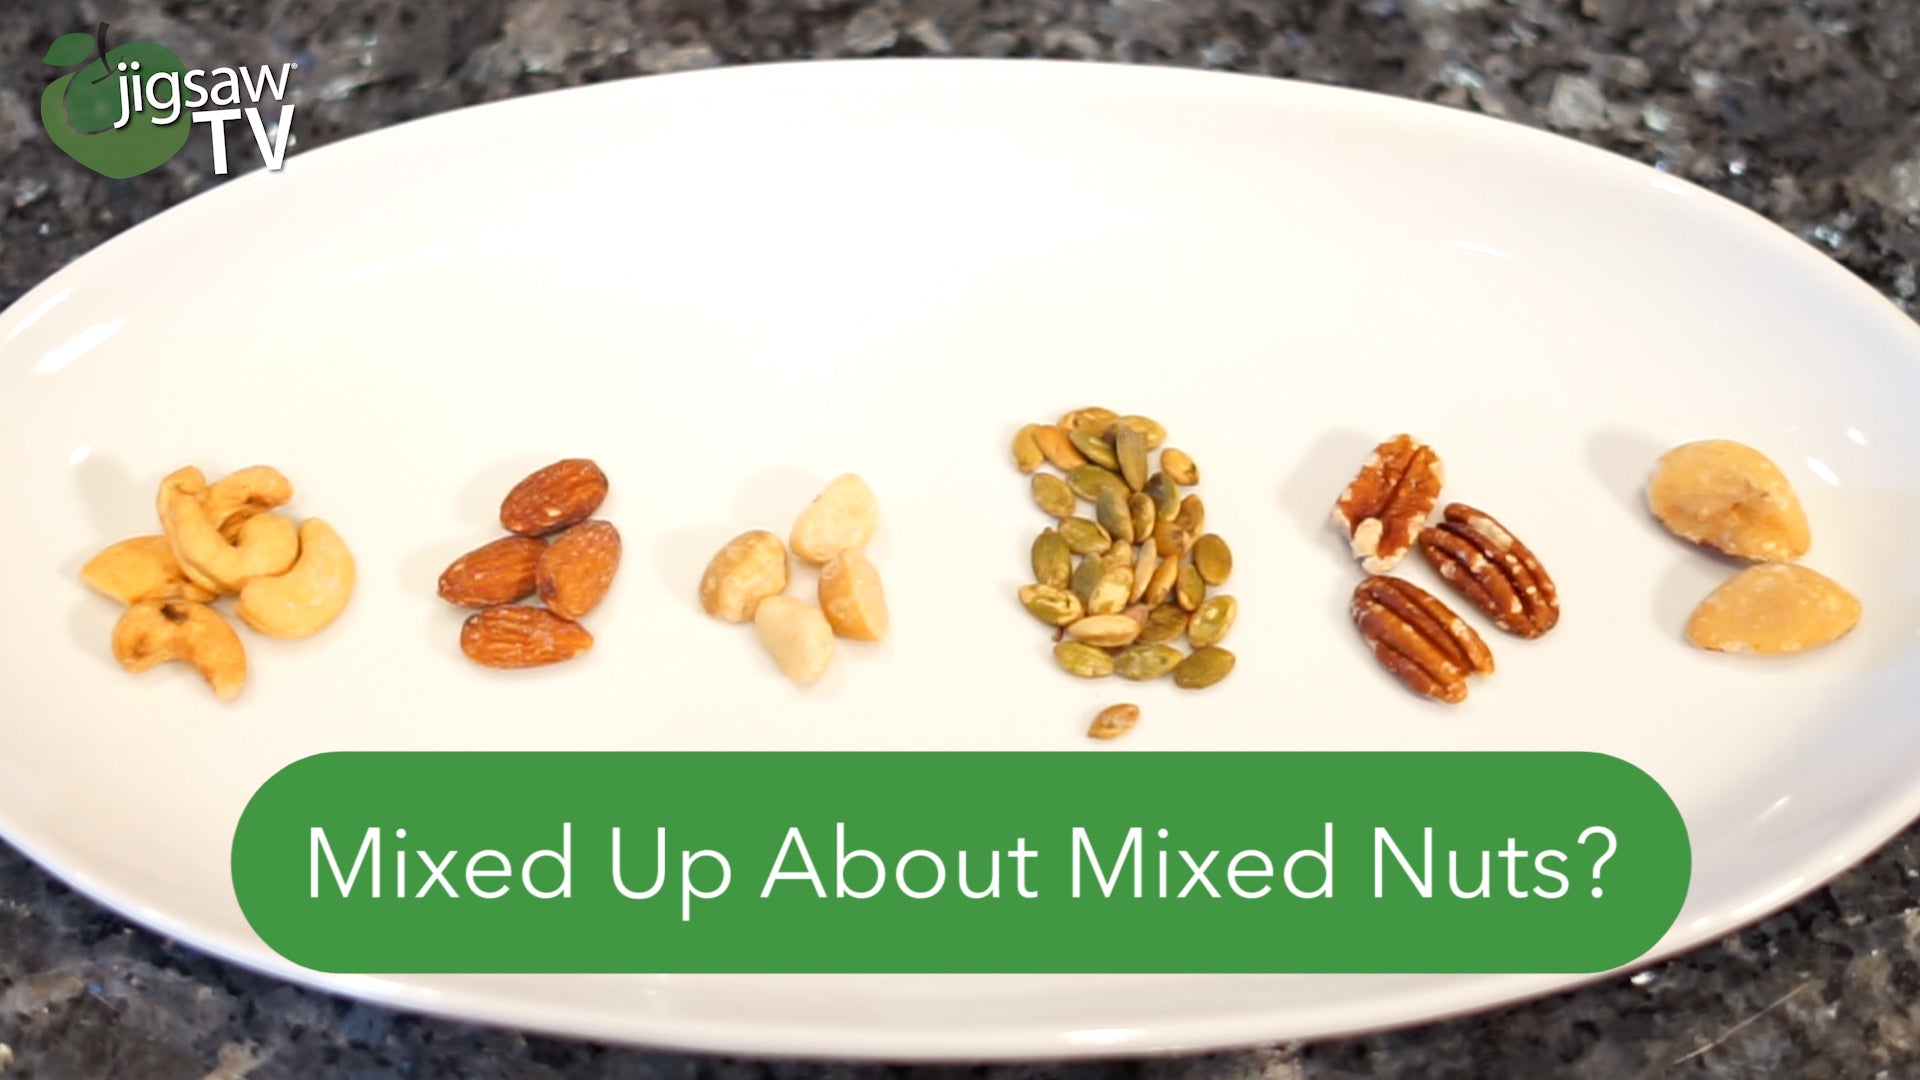 Mixed up about Mixed nuts?